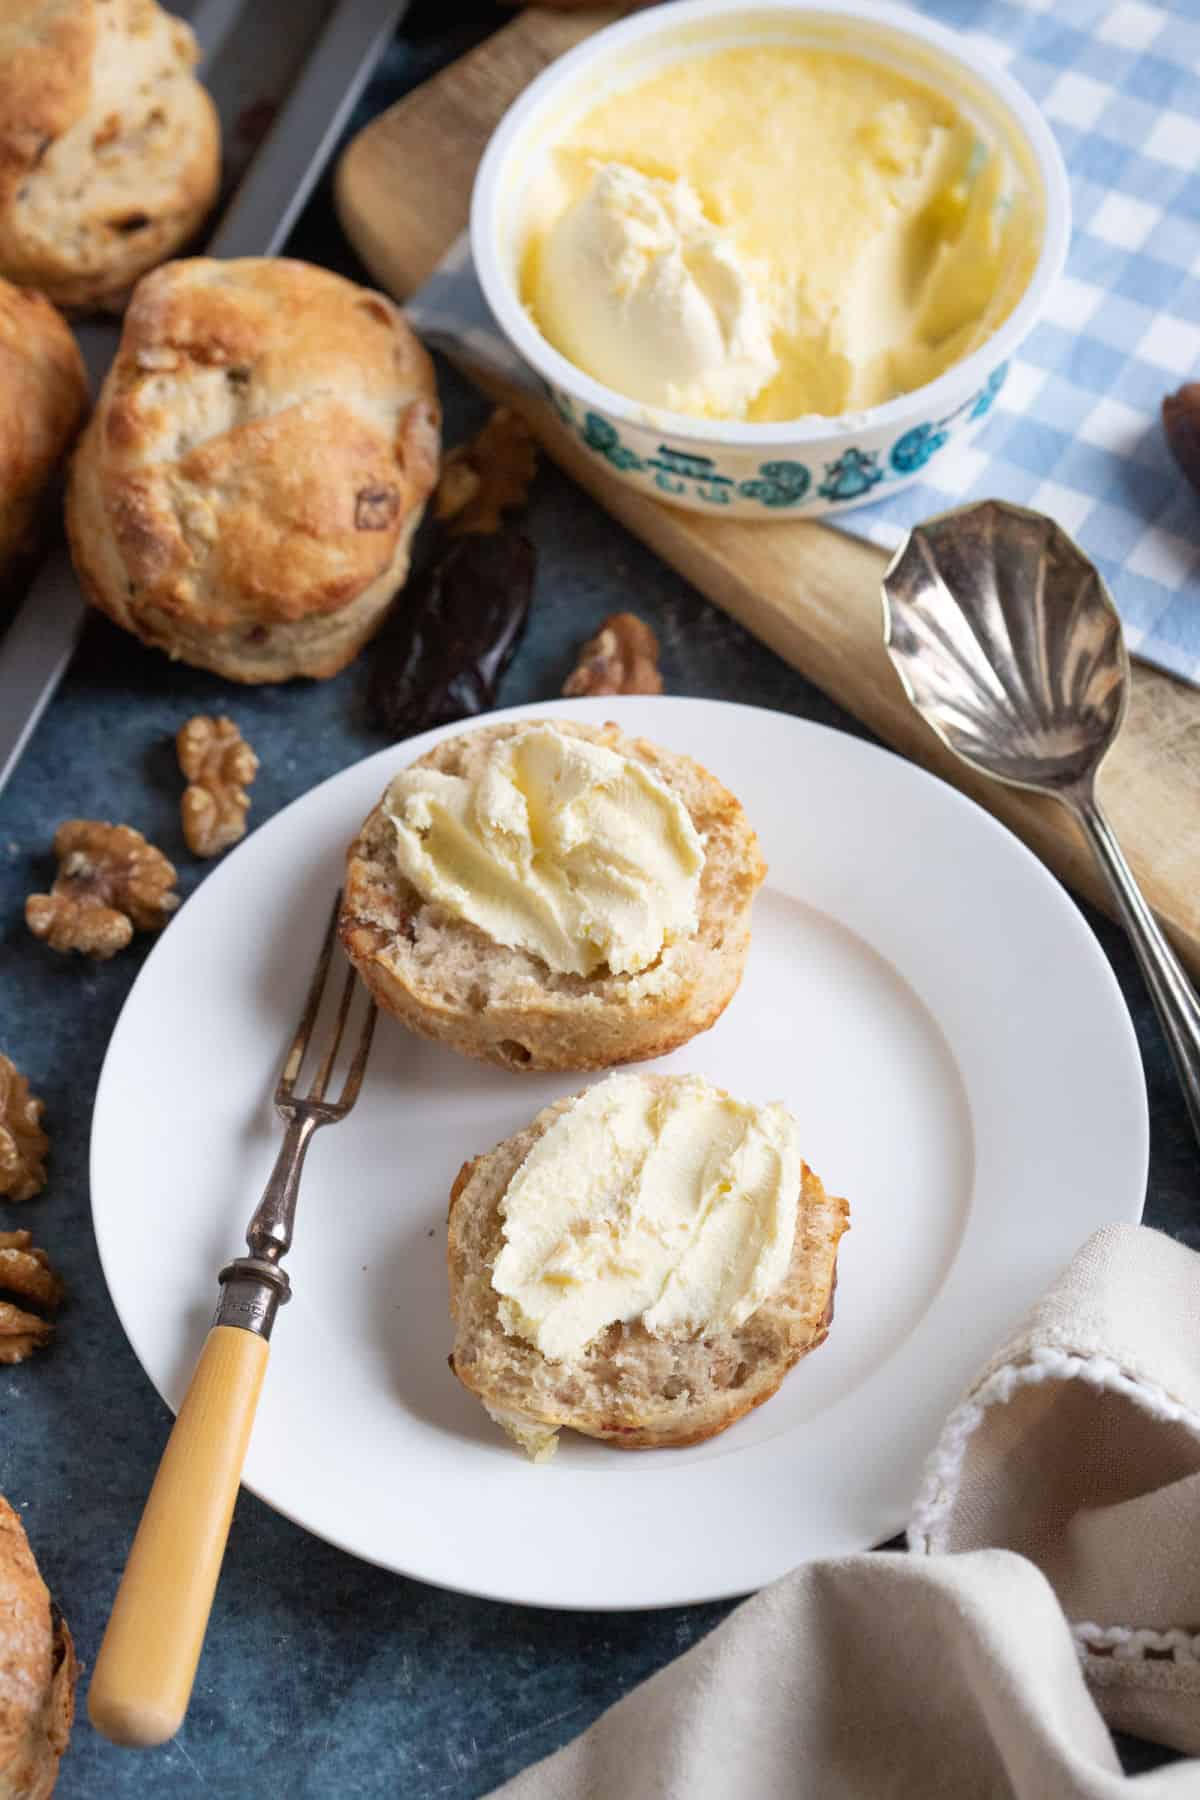 A date and walnut scone on a white plate.